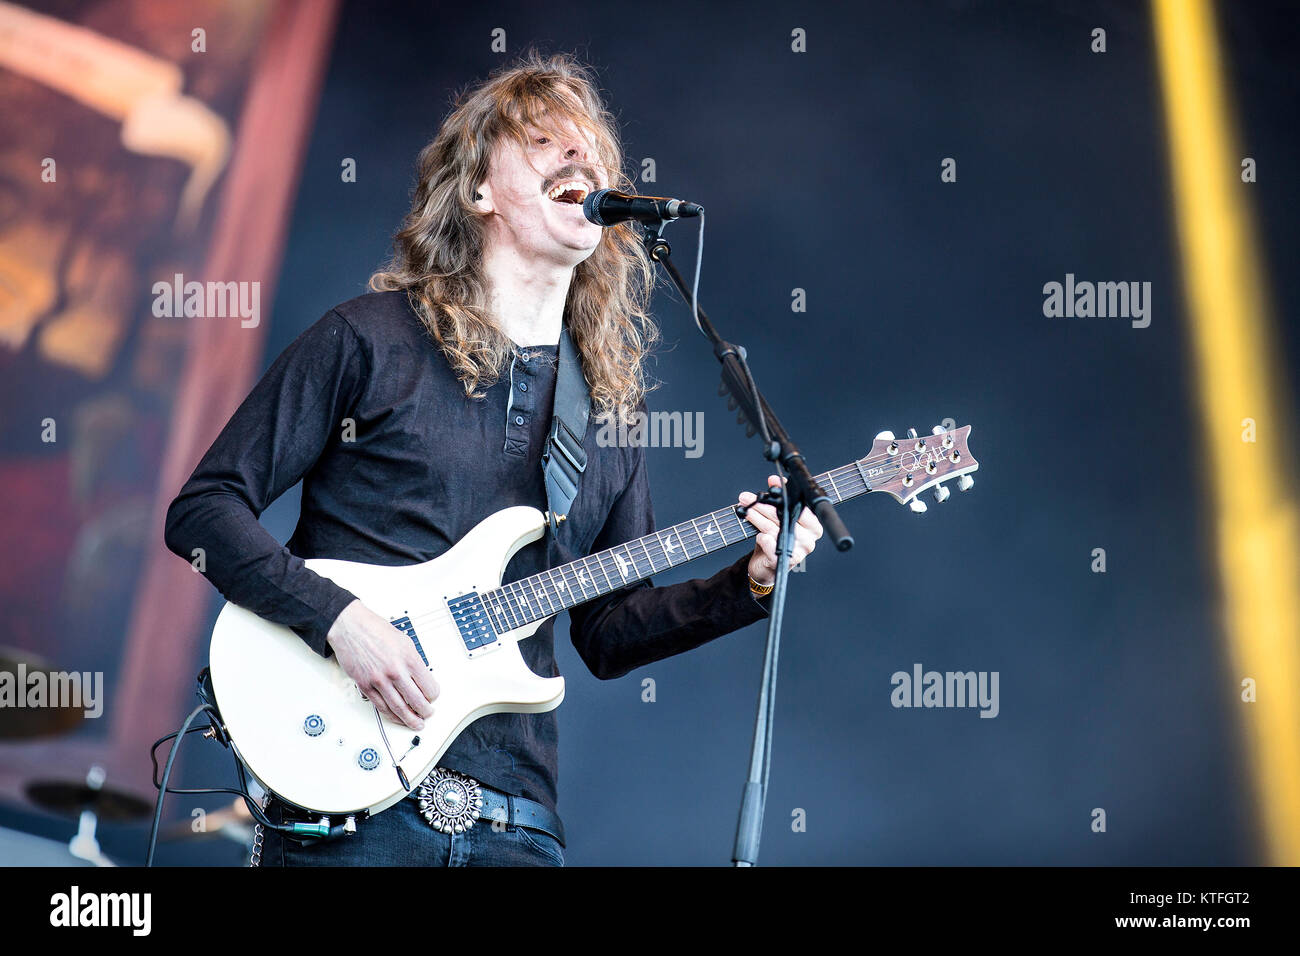 Opeth, the American heavy band, performs a live concert at the Swedish music festival Sweden Rock Festival 2015. Here vocalist and guitarist Mikael Åkerfeldt is seen live on stage. Sweden, 05/06 2015. Stock Photo